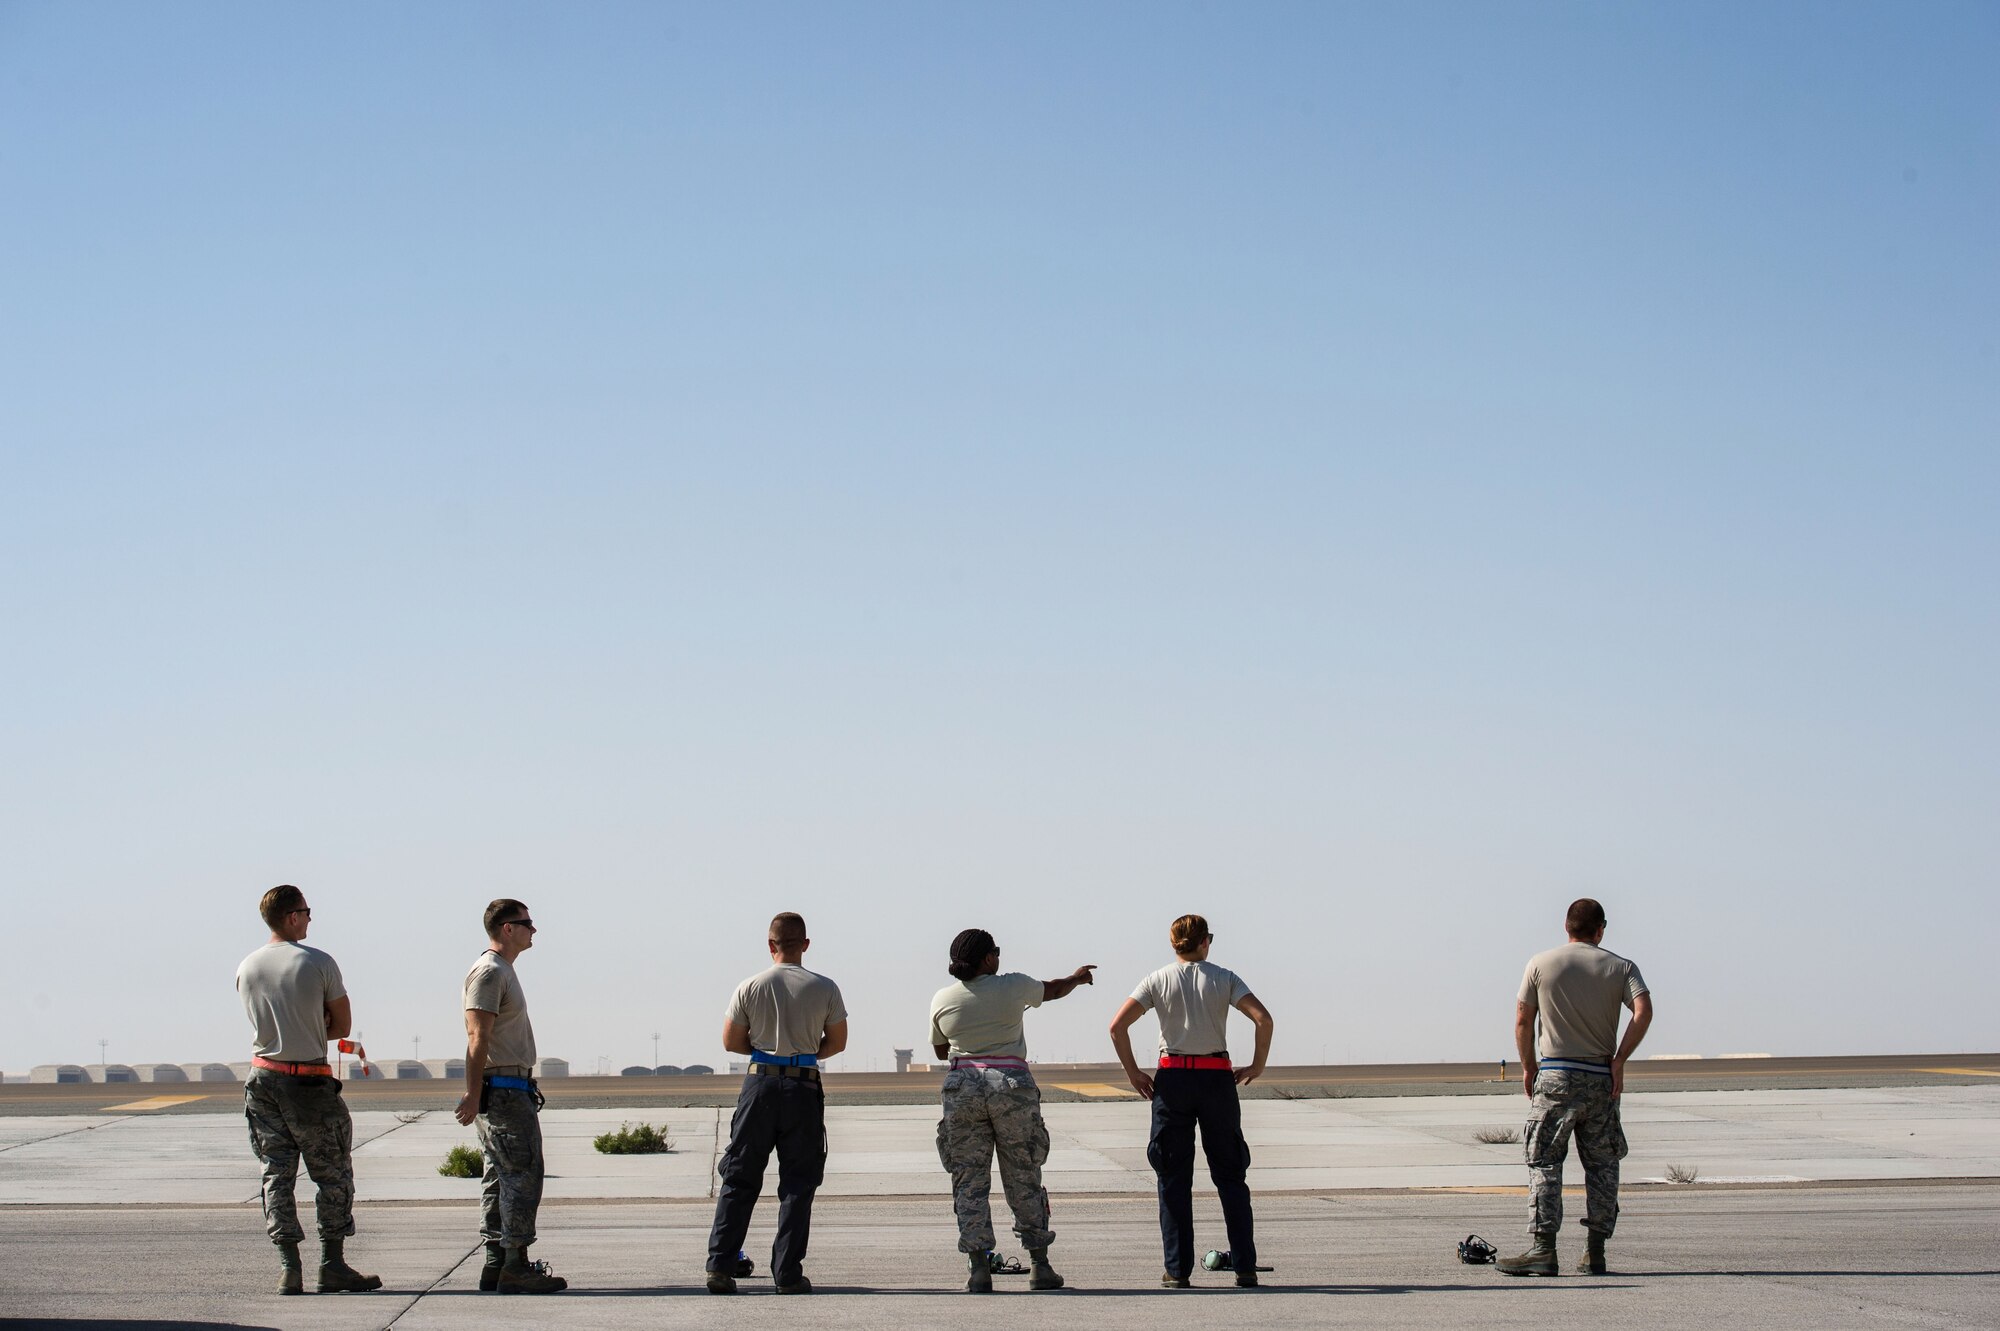 380th Expeditionary Aircraft Maintenance Squadron Airmen watch an E-3 Sentry before it departs and completes a sortie in support of Combined Joint Task Force-Operation Inherent Resolve at an undisclosed location in Southwest Asia, Feb. 2, 2017. After every preflight inspection, the E-3 Sentry maintainers complete as many push-ups as possible while the aircraft takes off. (U.S. Air Force photo by Senior Airman Tyler Woodward)